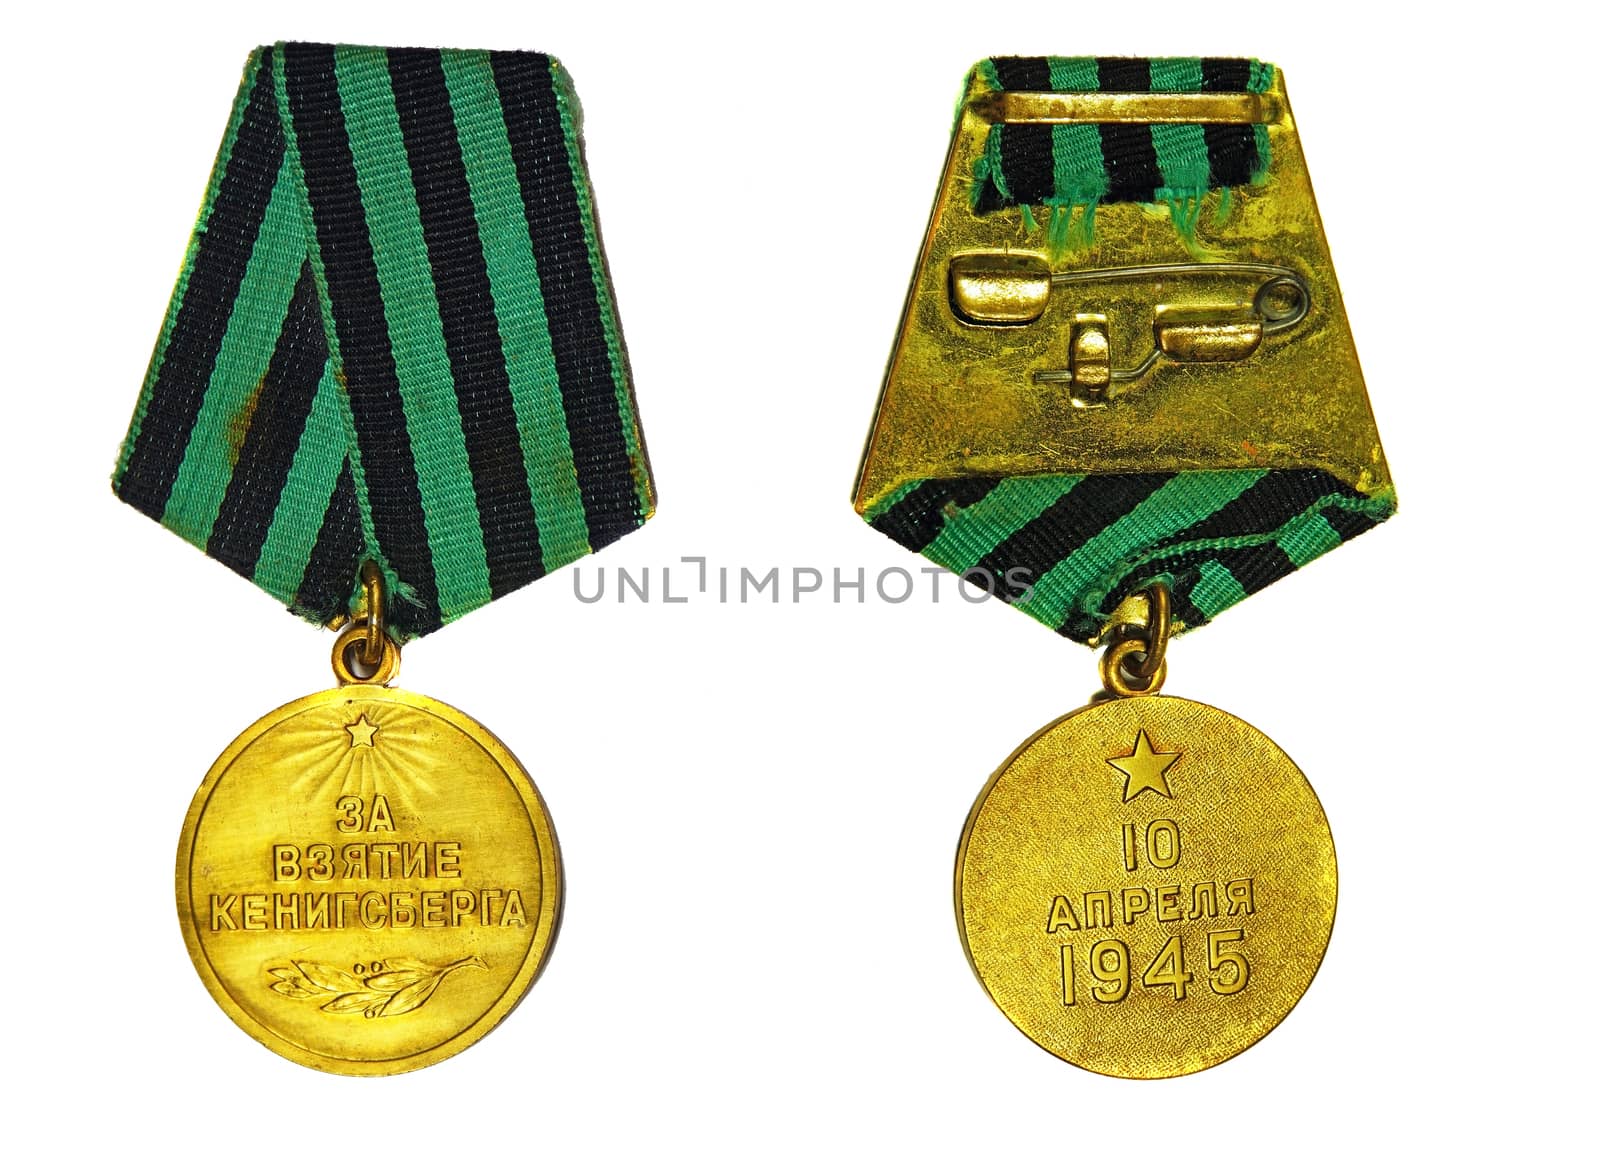 Medal "For the Capture of Kenigsberg" (with the reverse side) on a white background